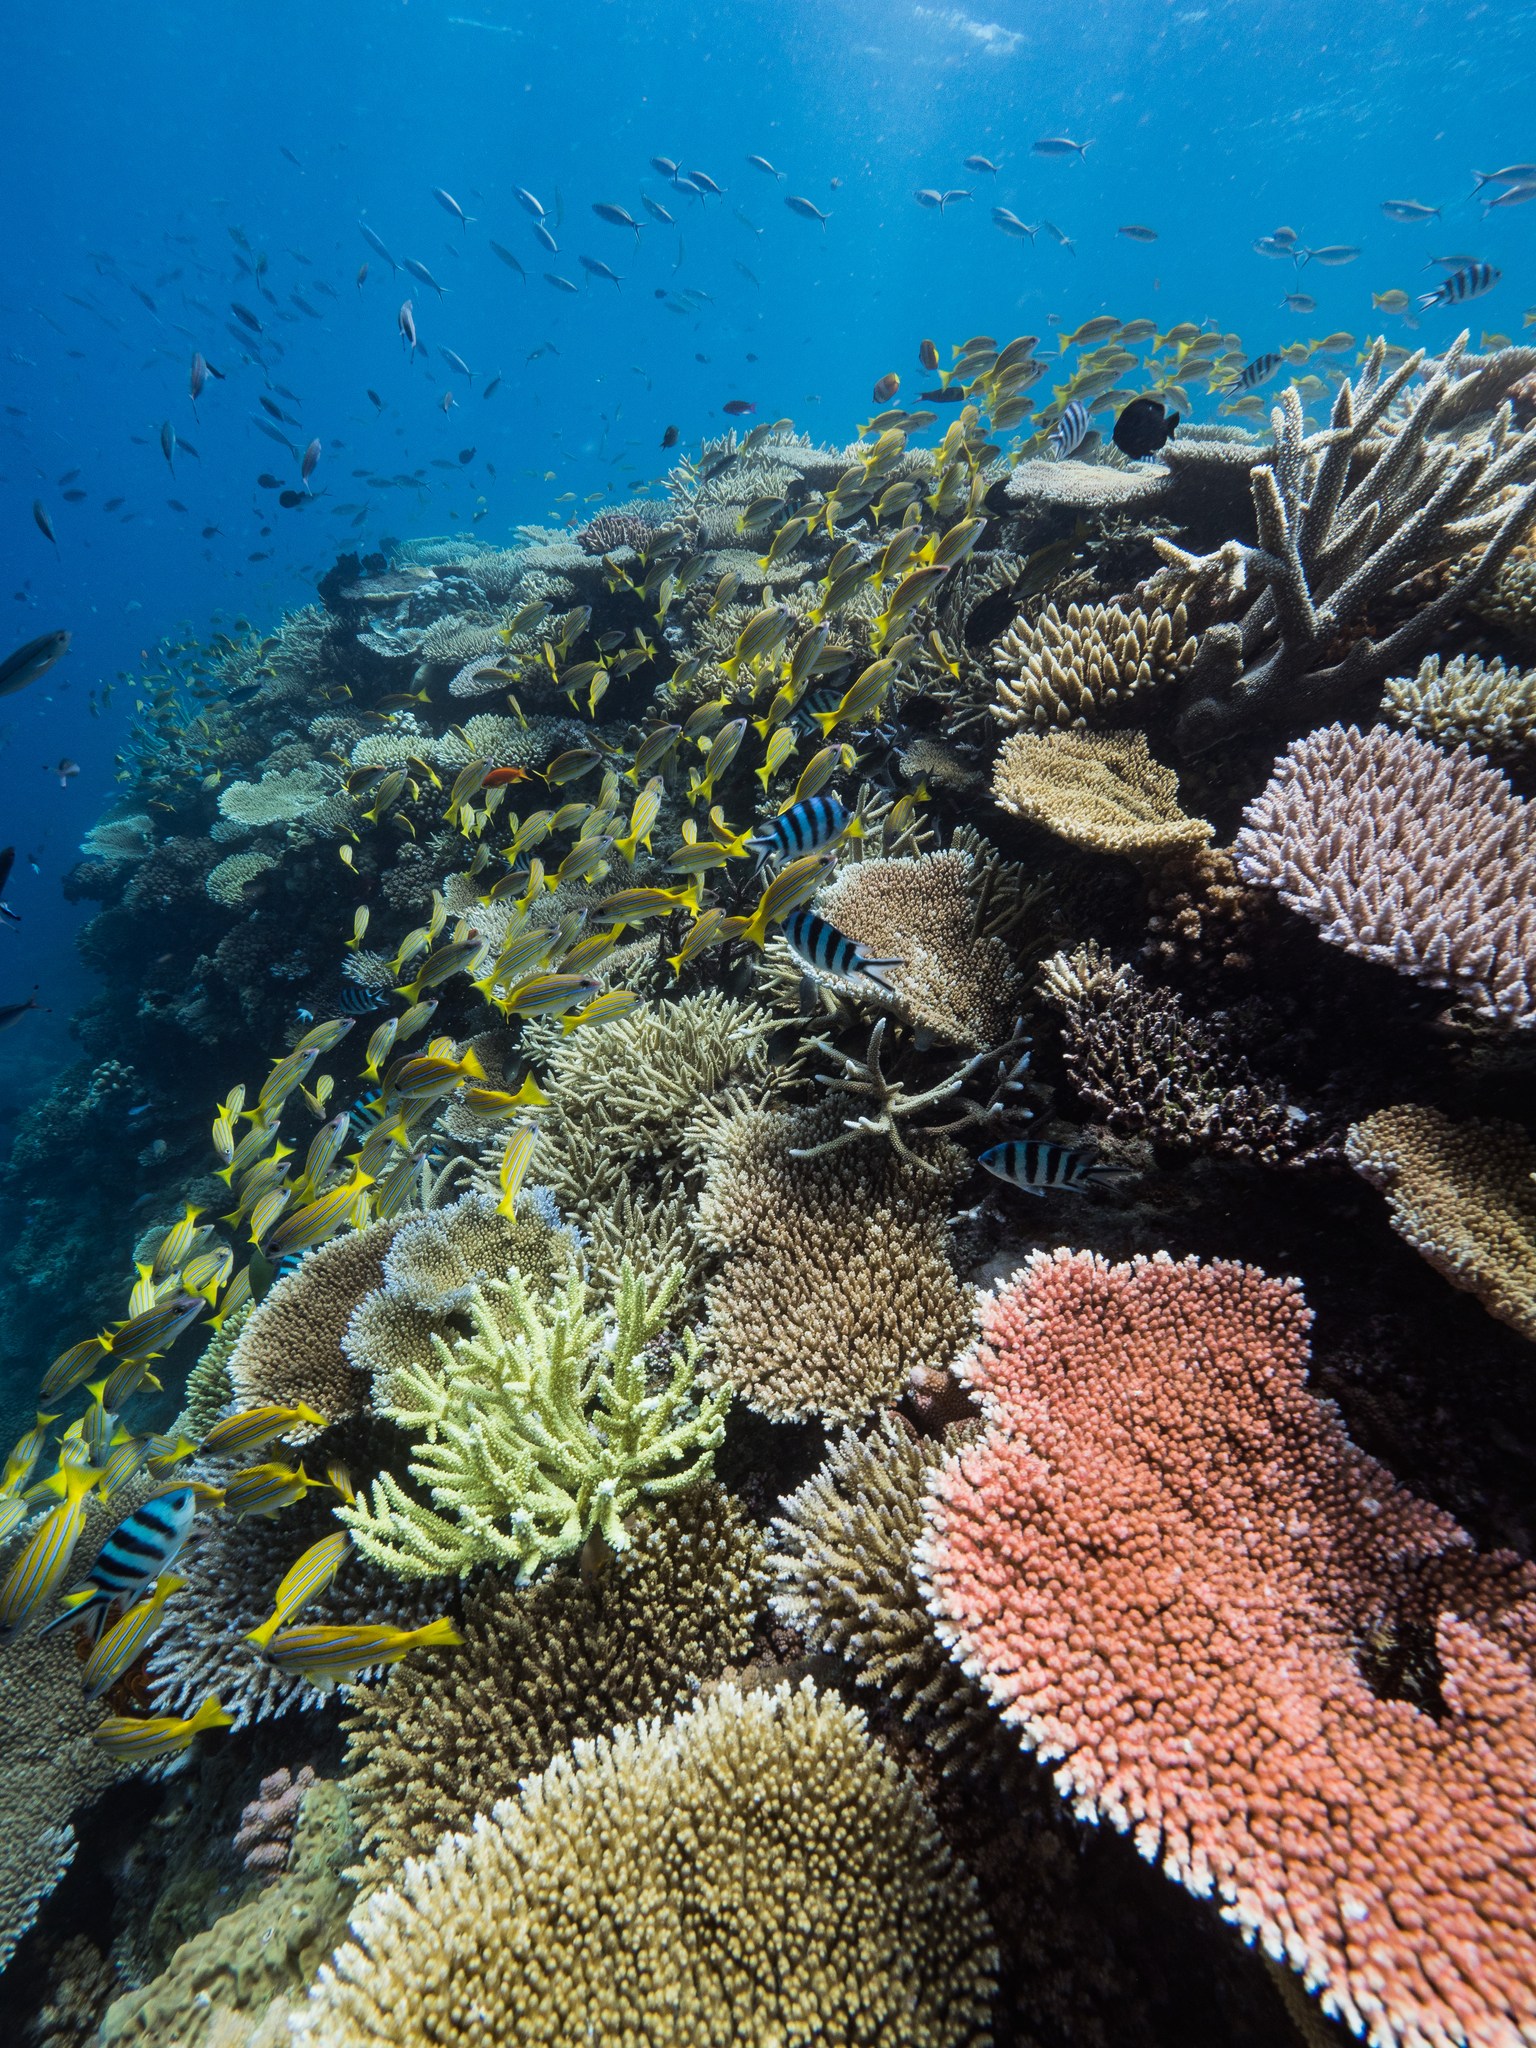 An incredible reef site seen during the Great Reef Census expedition on Spirit of Freedom.